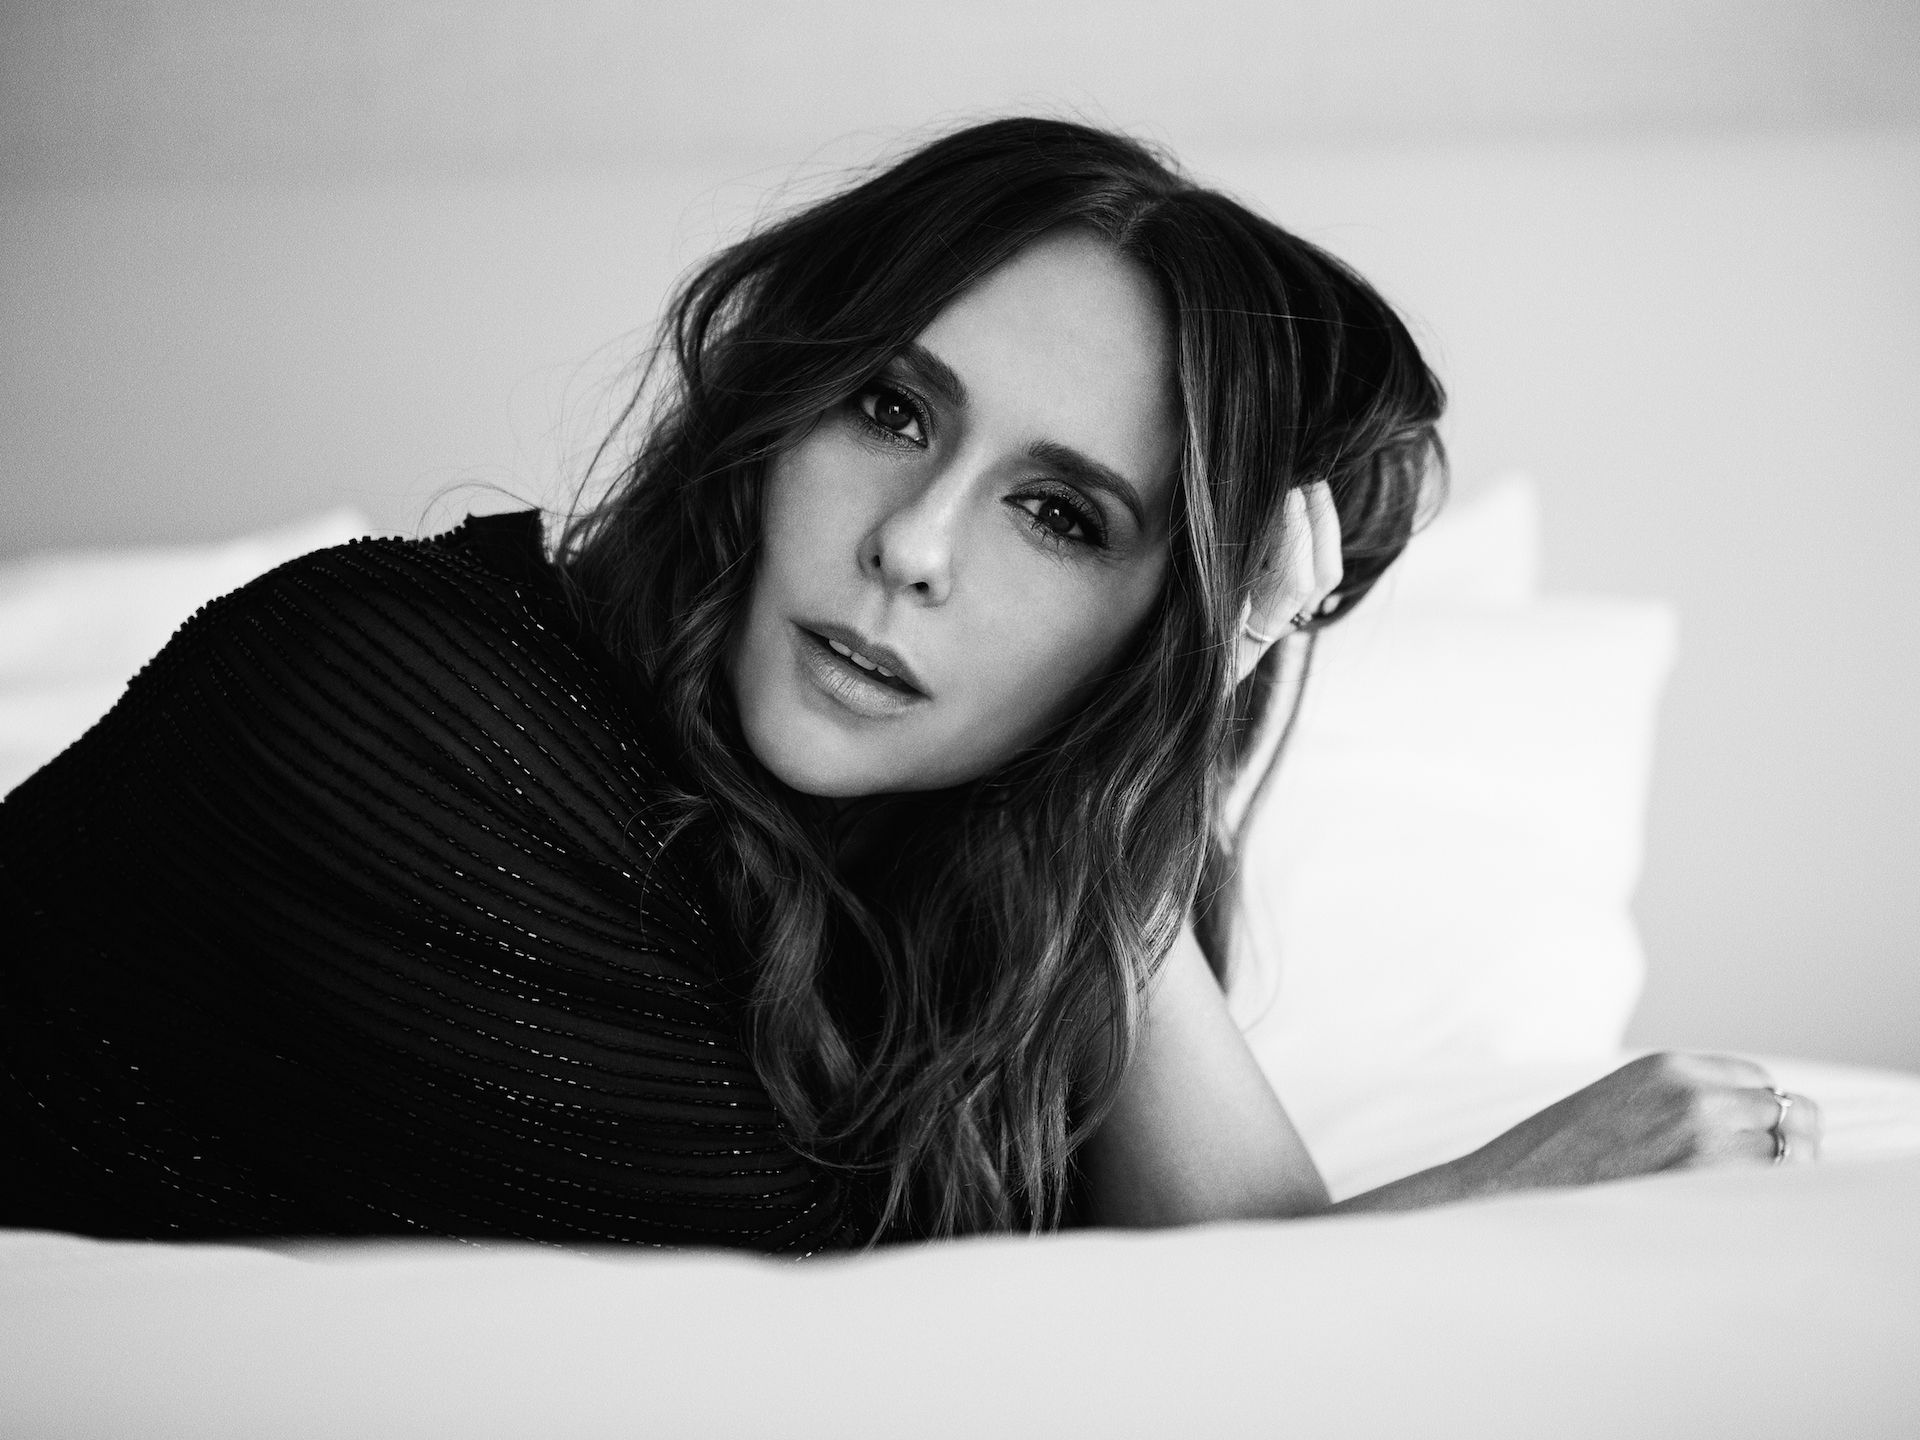 Jennifer Love Hewitt Wondered If There Was Something More So She Went Looking For It